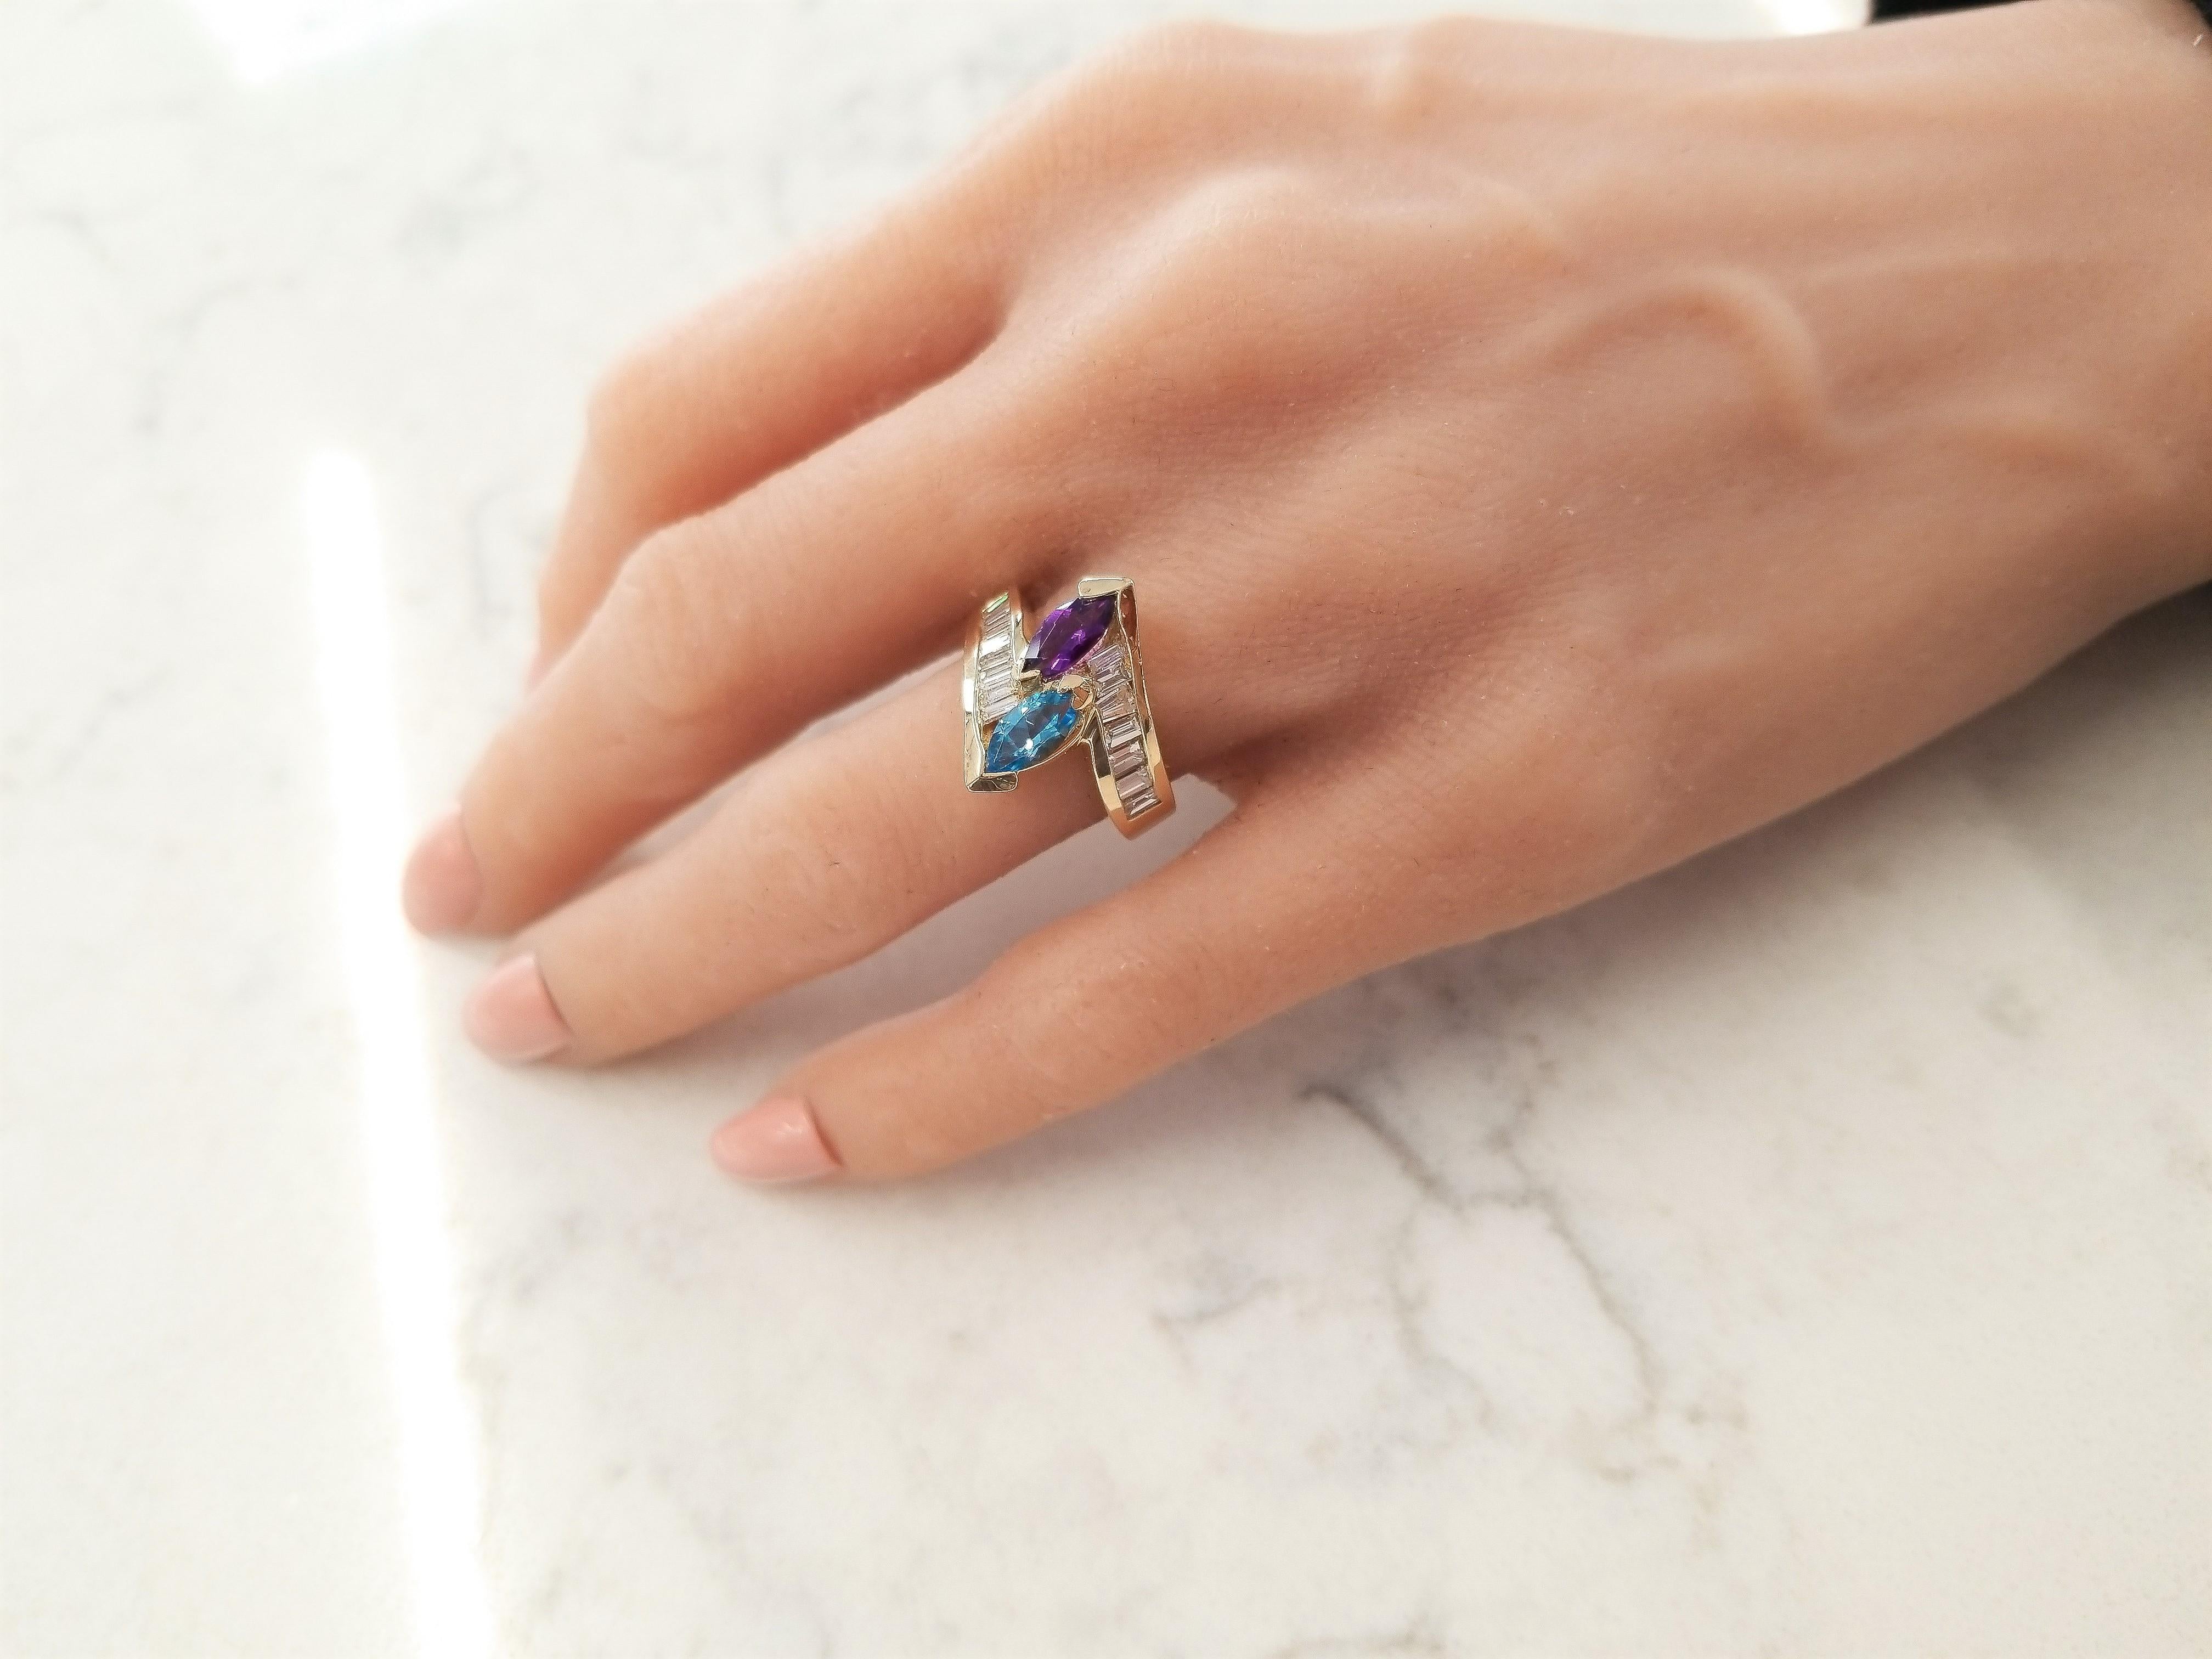 Best friends forever, amethyst and blue topaz are a magnificent pair. These marquise gemstones are set into a bypass ring design and are accompanied by gorgeous baguette diamonds. The diamonds are securely channel set into the striking 14 Karat